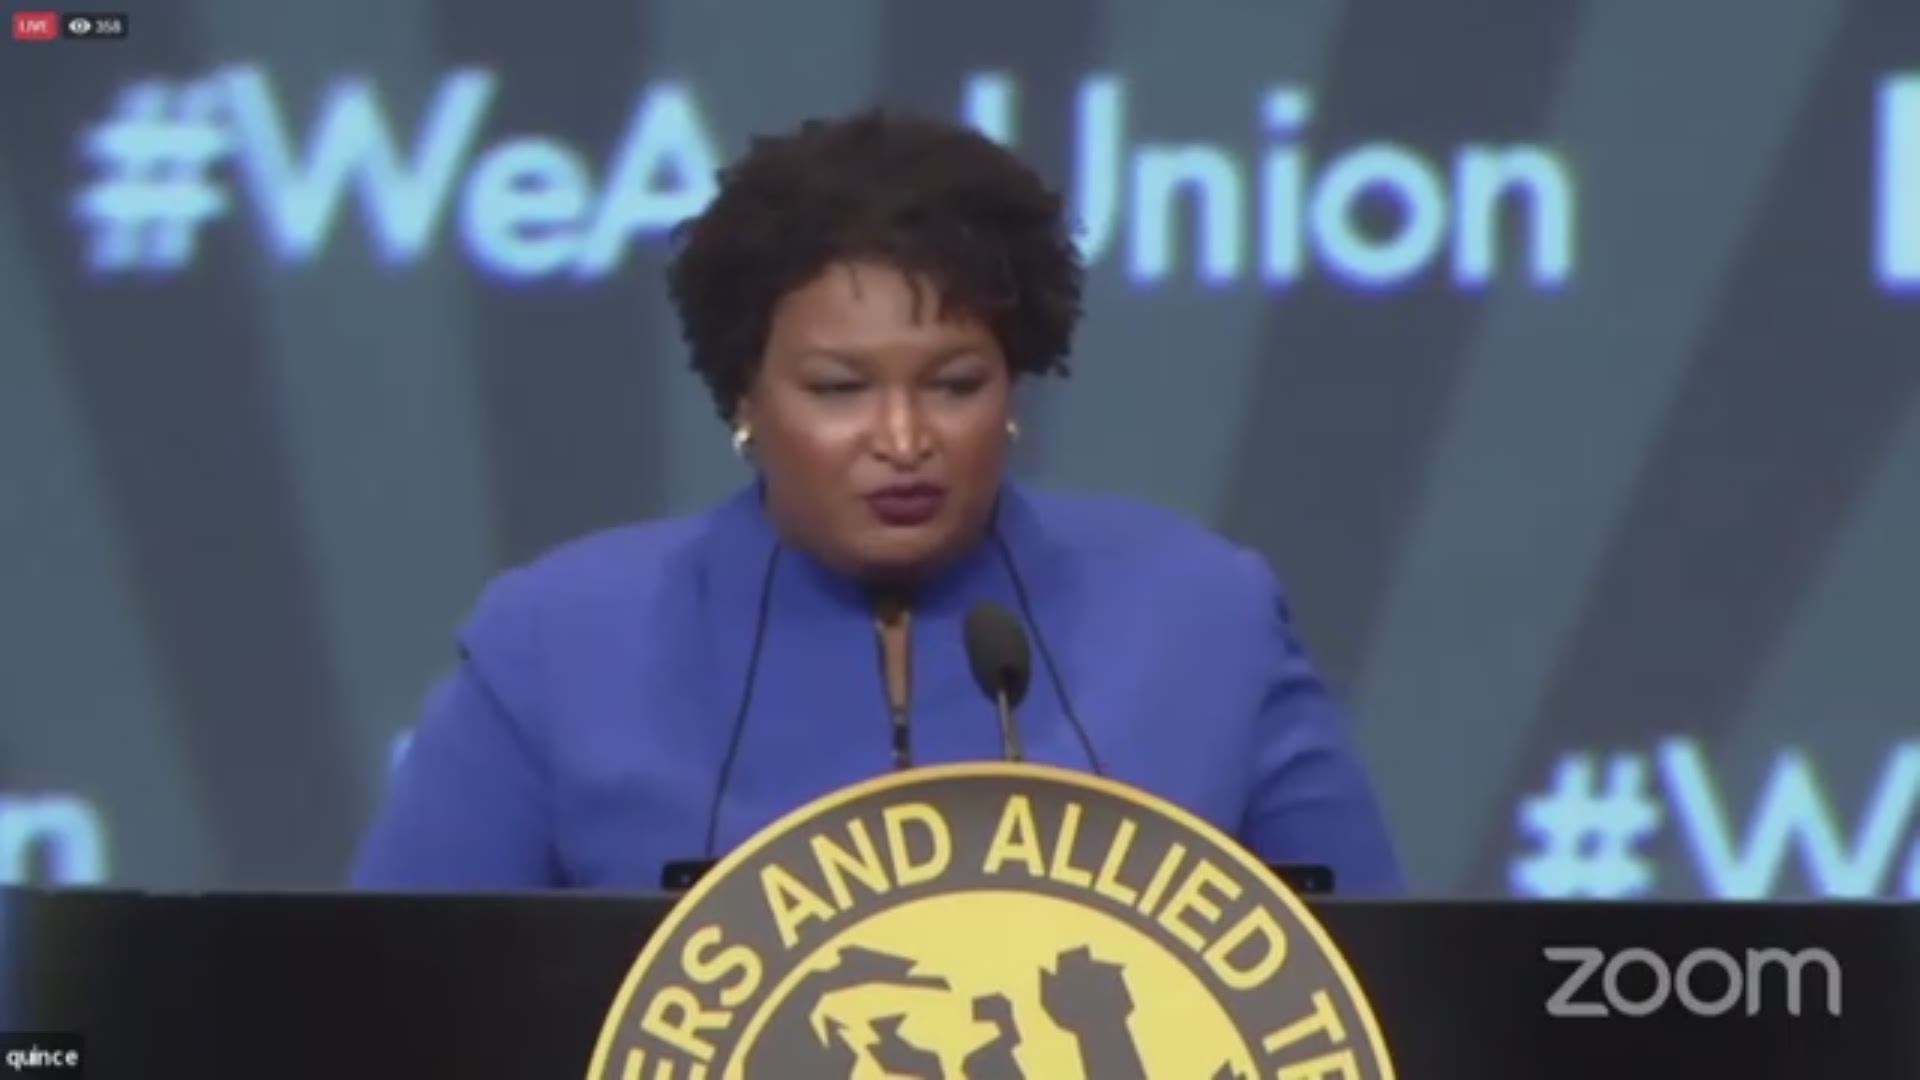 Stacey Abrams announced on Tuesday that she's launching a new multistate voter protection initiative and not running for president in 2020.